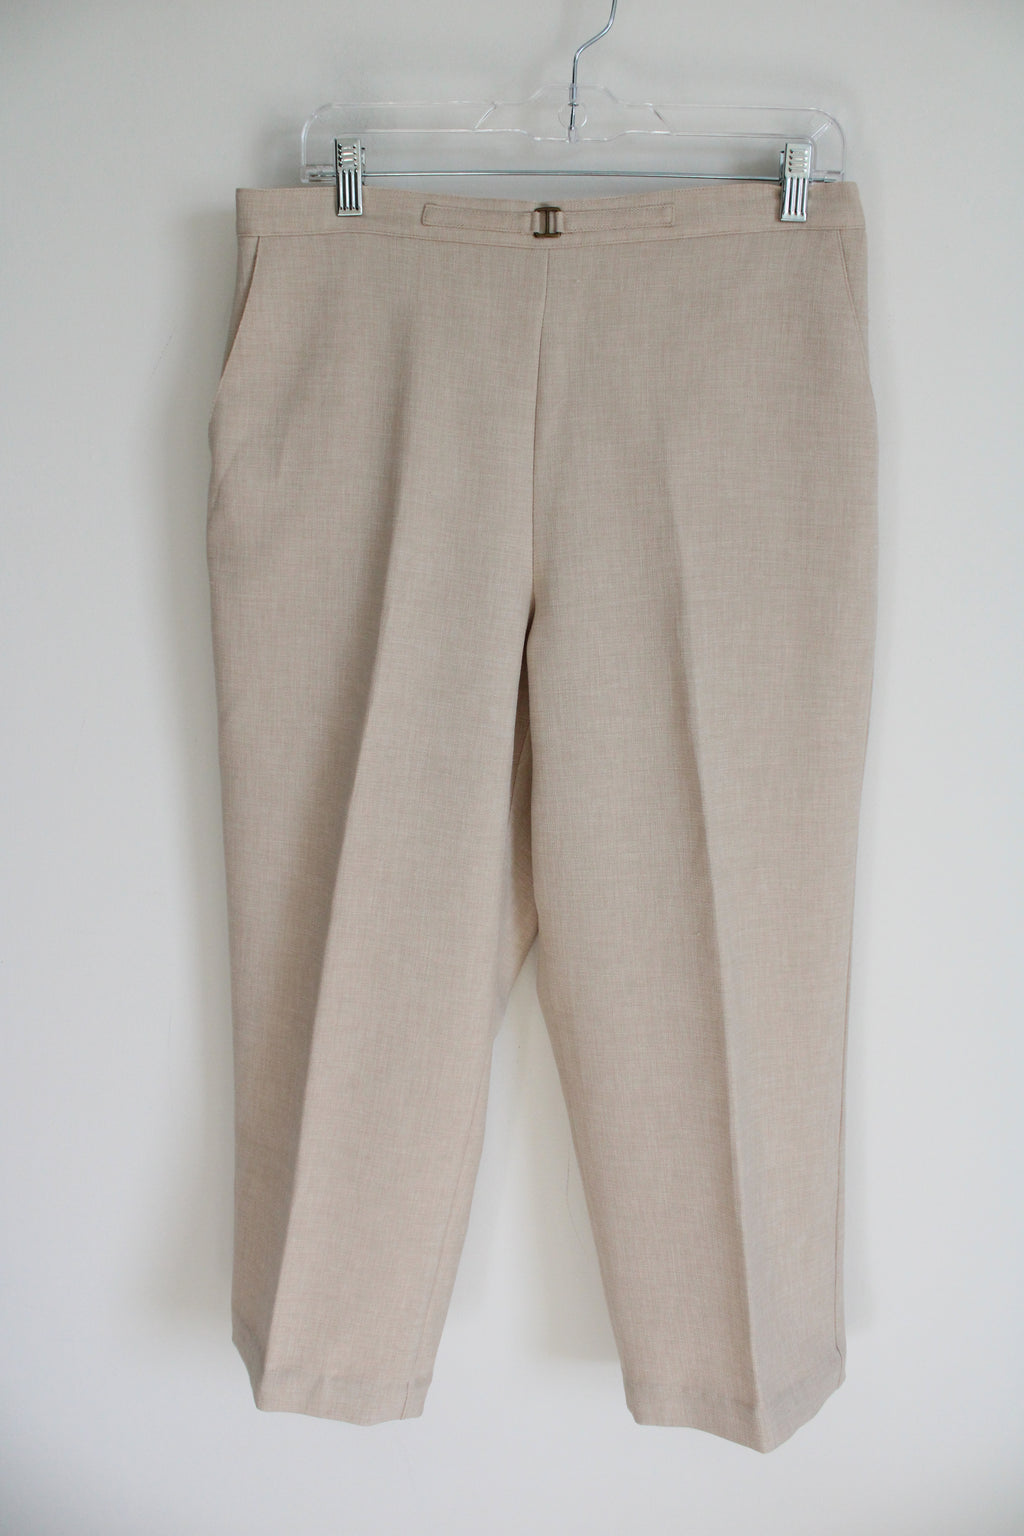 Alfred Dunner Beige Trouser Ankle Pant | 14 Petite